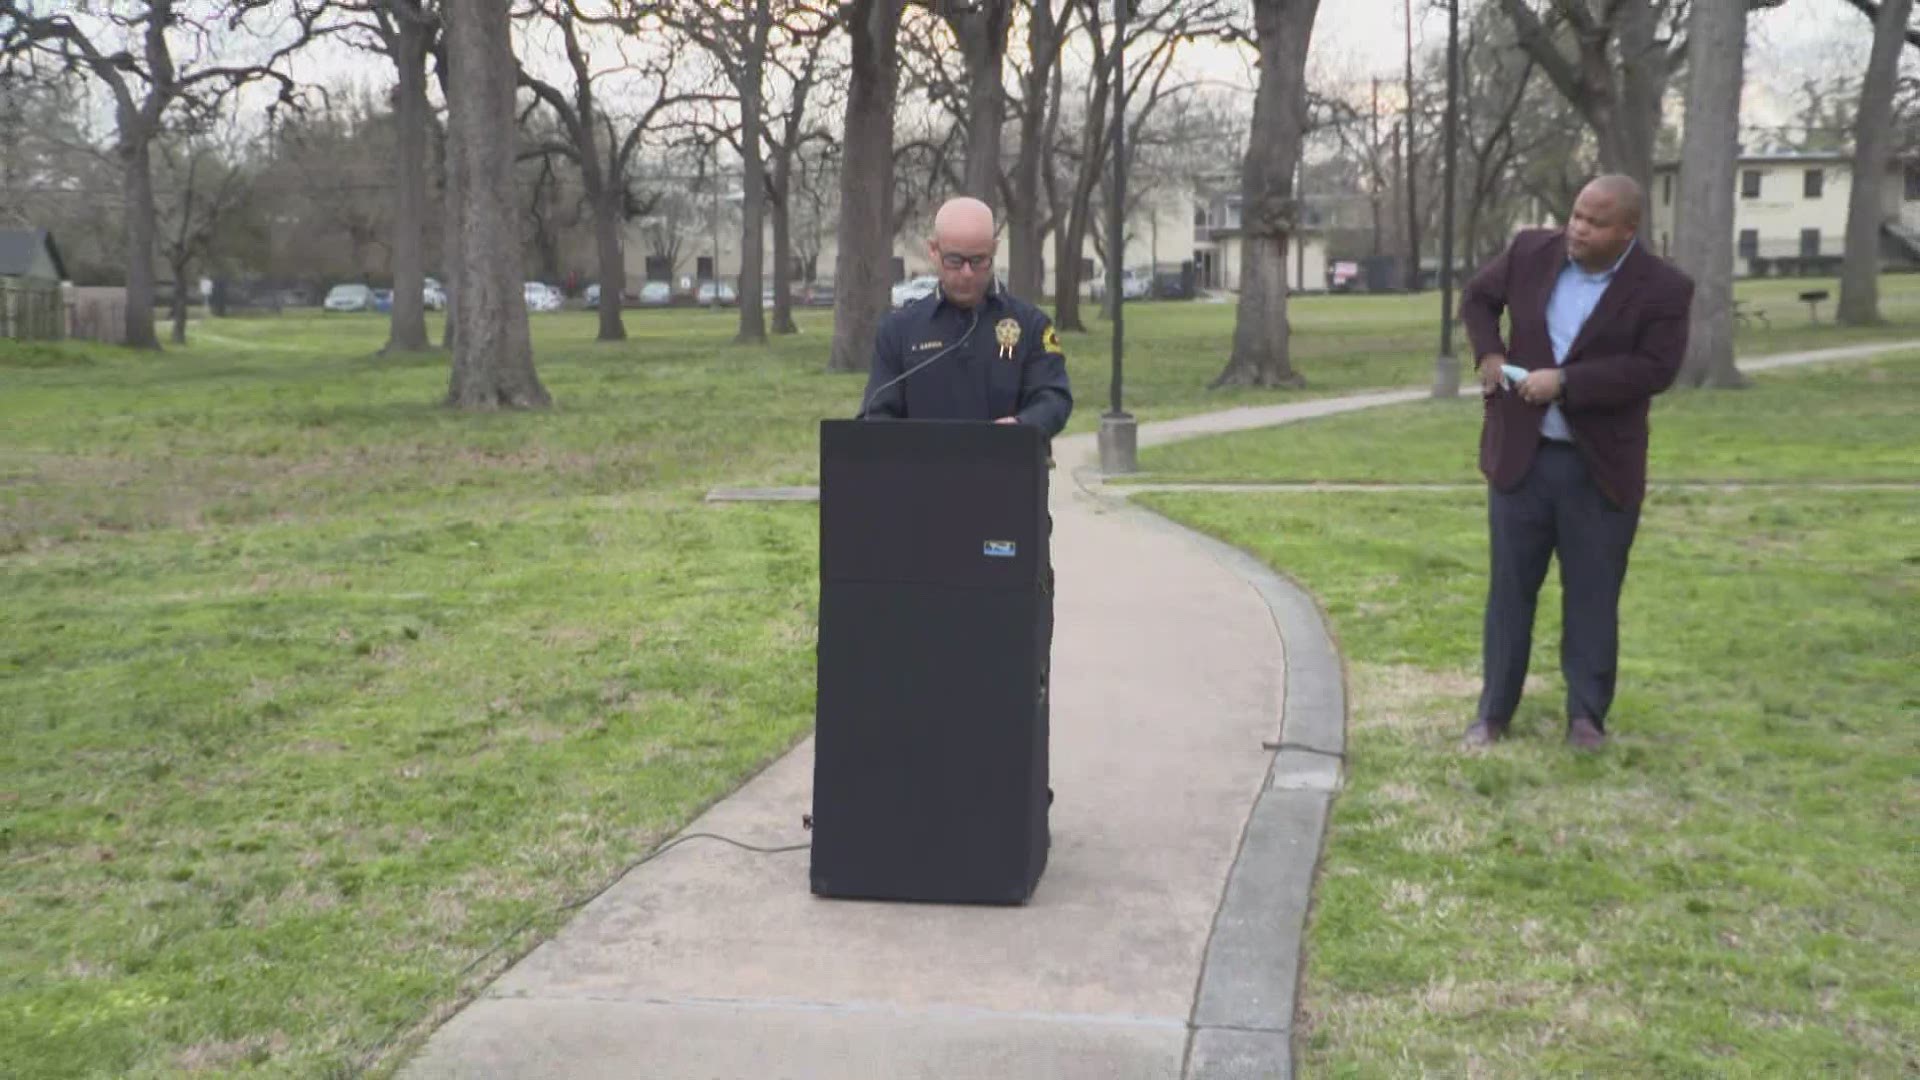 City officials said they have installed 76 new exterior lights around Opportunity Park near the 3100 block of Pine Street to deter nighttime violence.